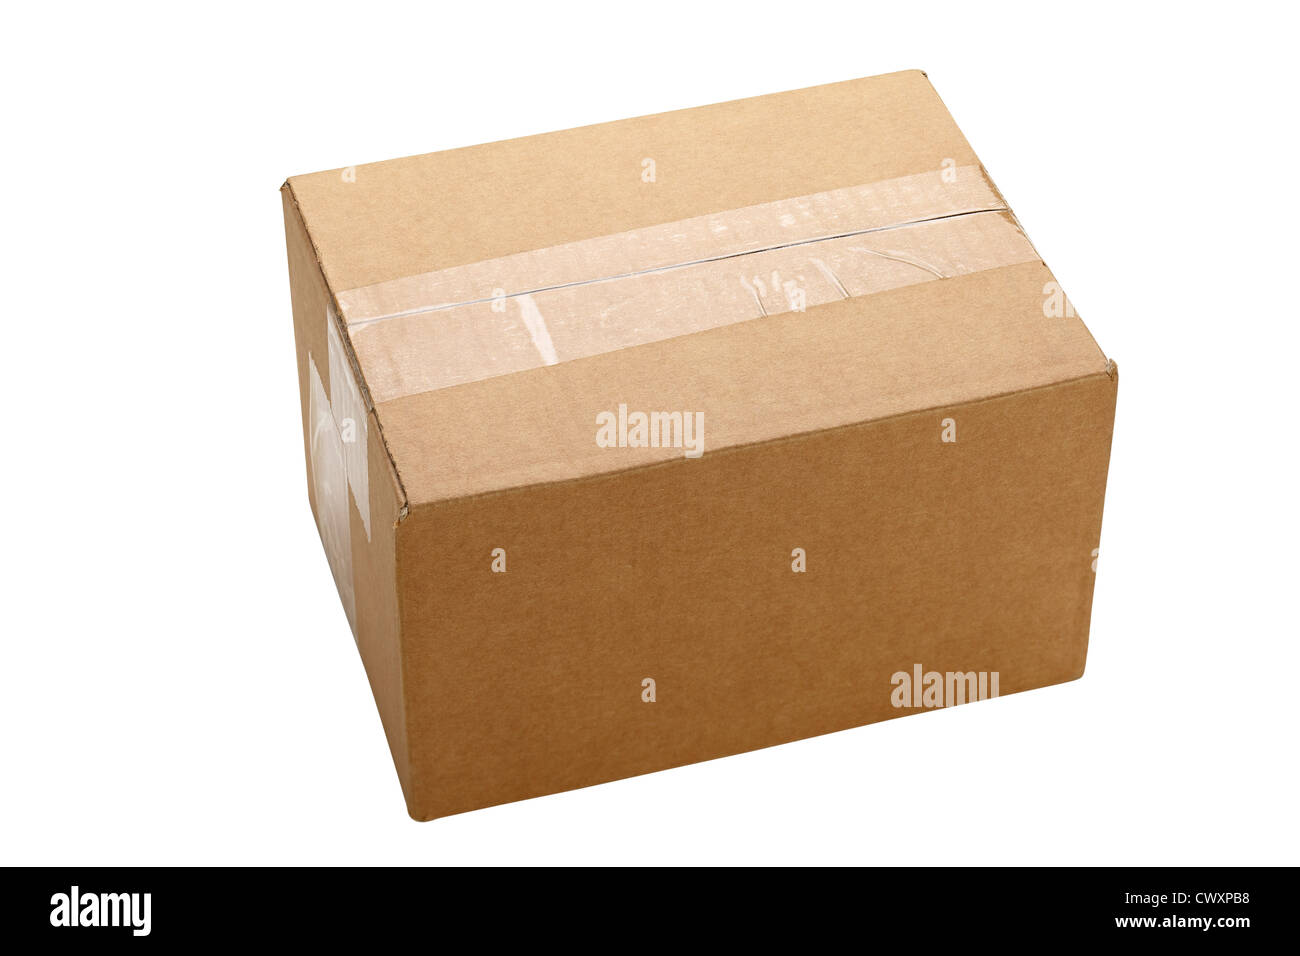 A small cardboard box isolated on white background Stock Photo